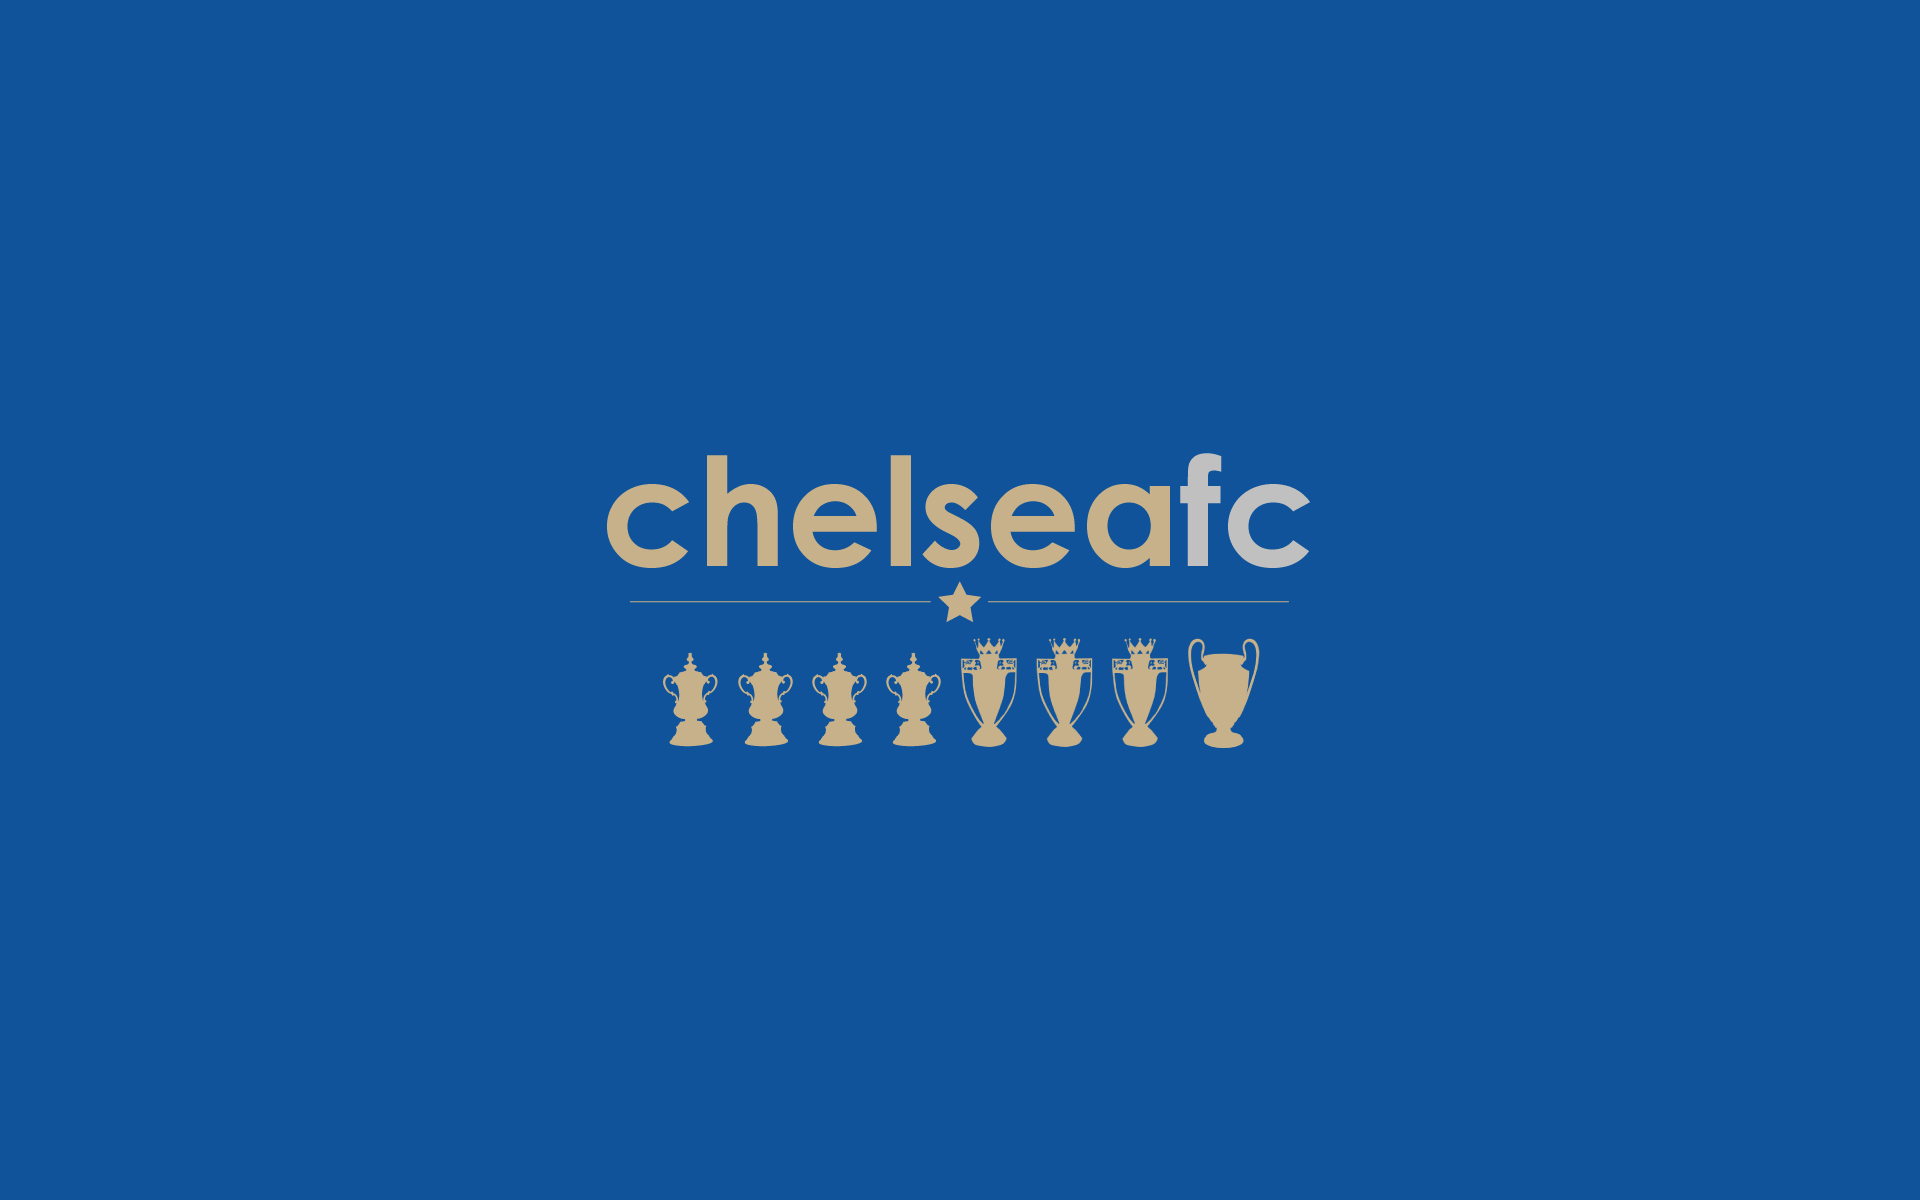 can anyone make rchelseas page banner into a wallpaper chelseafc